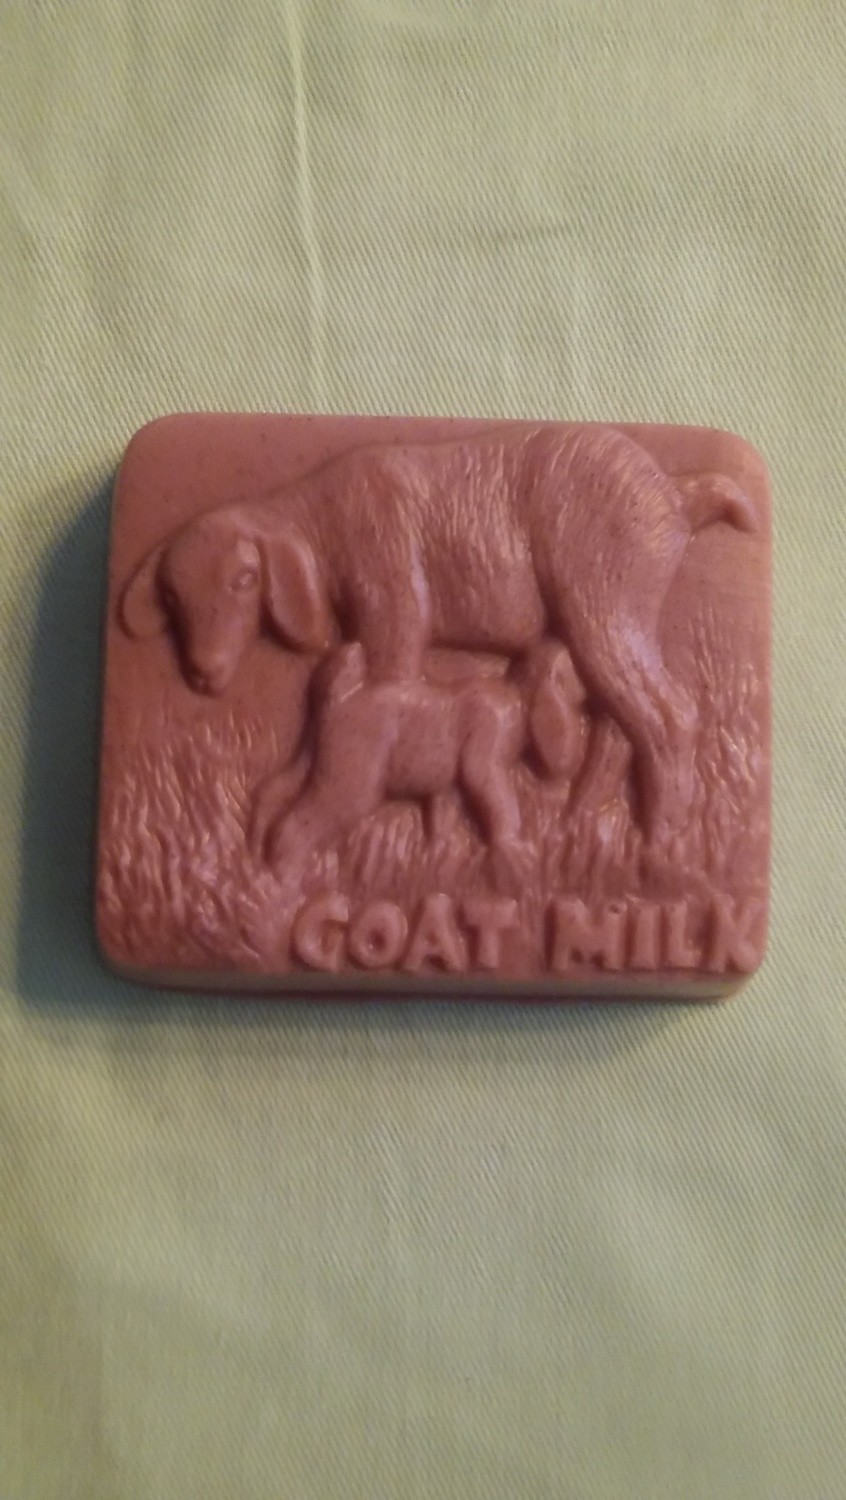 Pure Country Essentials Soap, Goats Milk, Unscented, Square W/ Goats Molded